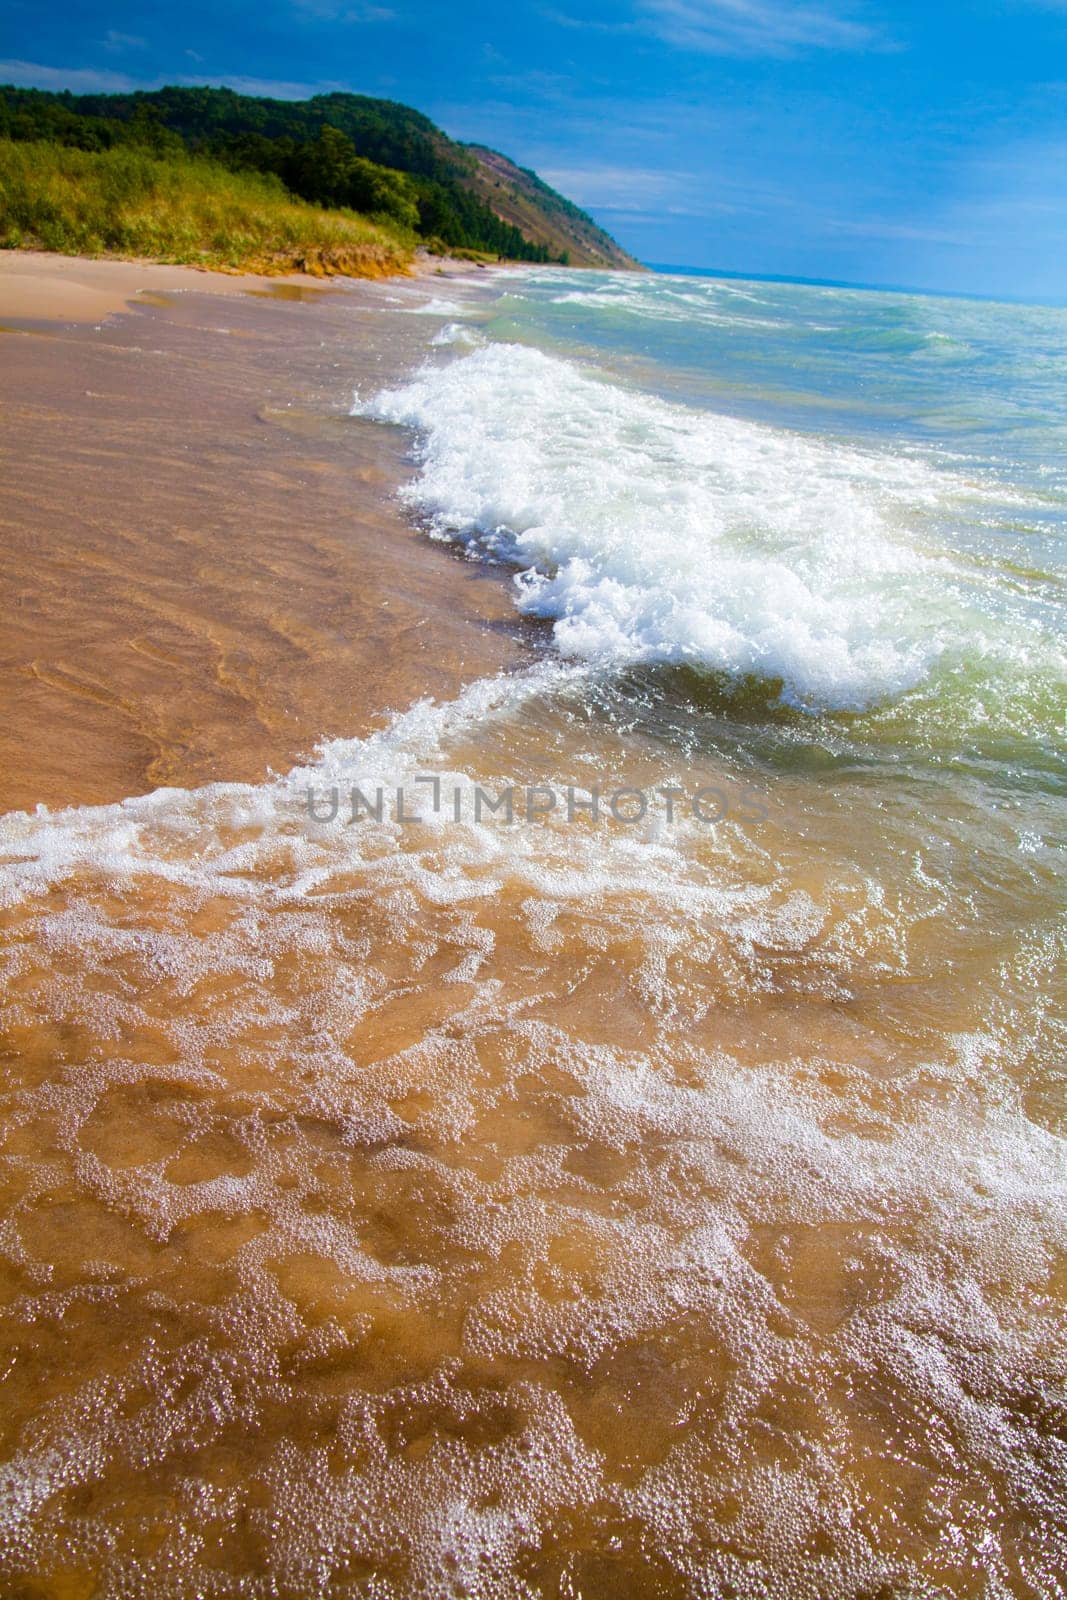 Secluded Lake Michigan Beach with Lush Greenery and Crashing Waves by njproductions